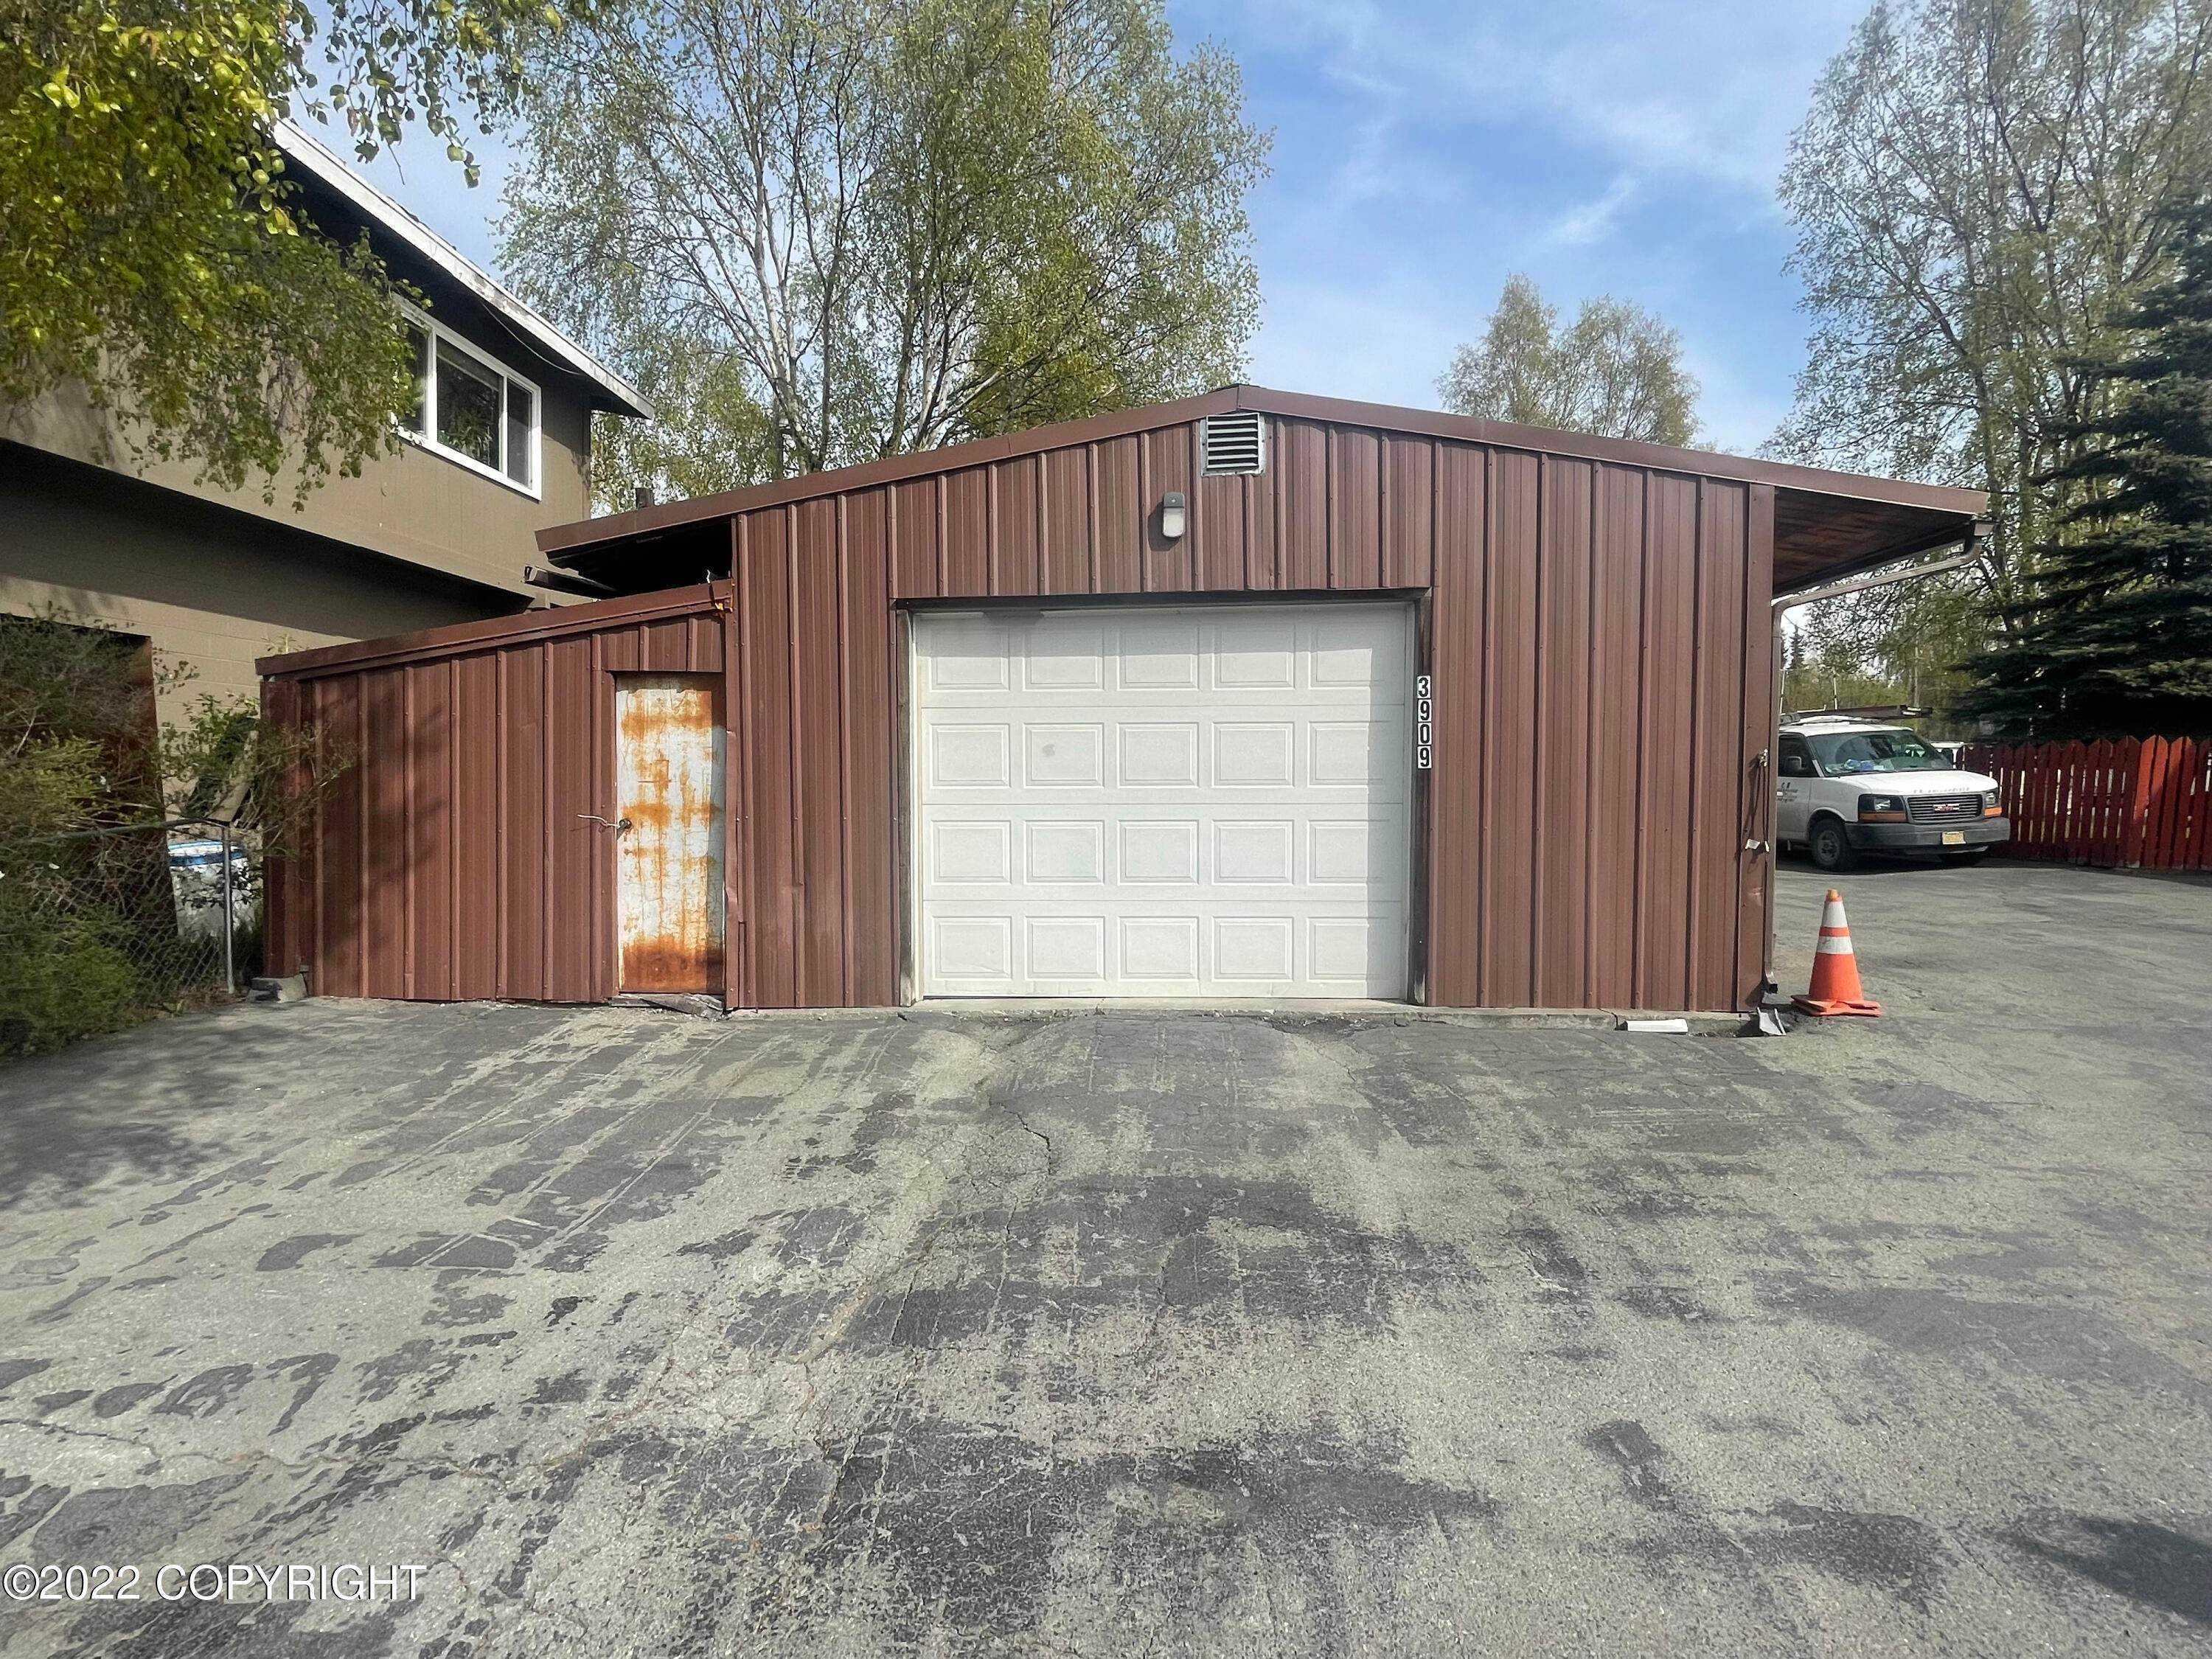 9. Business Opportunity for Sale at 1007 W 40th Avenue Anchorage, Alaska 99503 United States